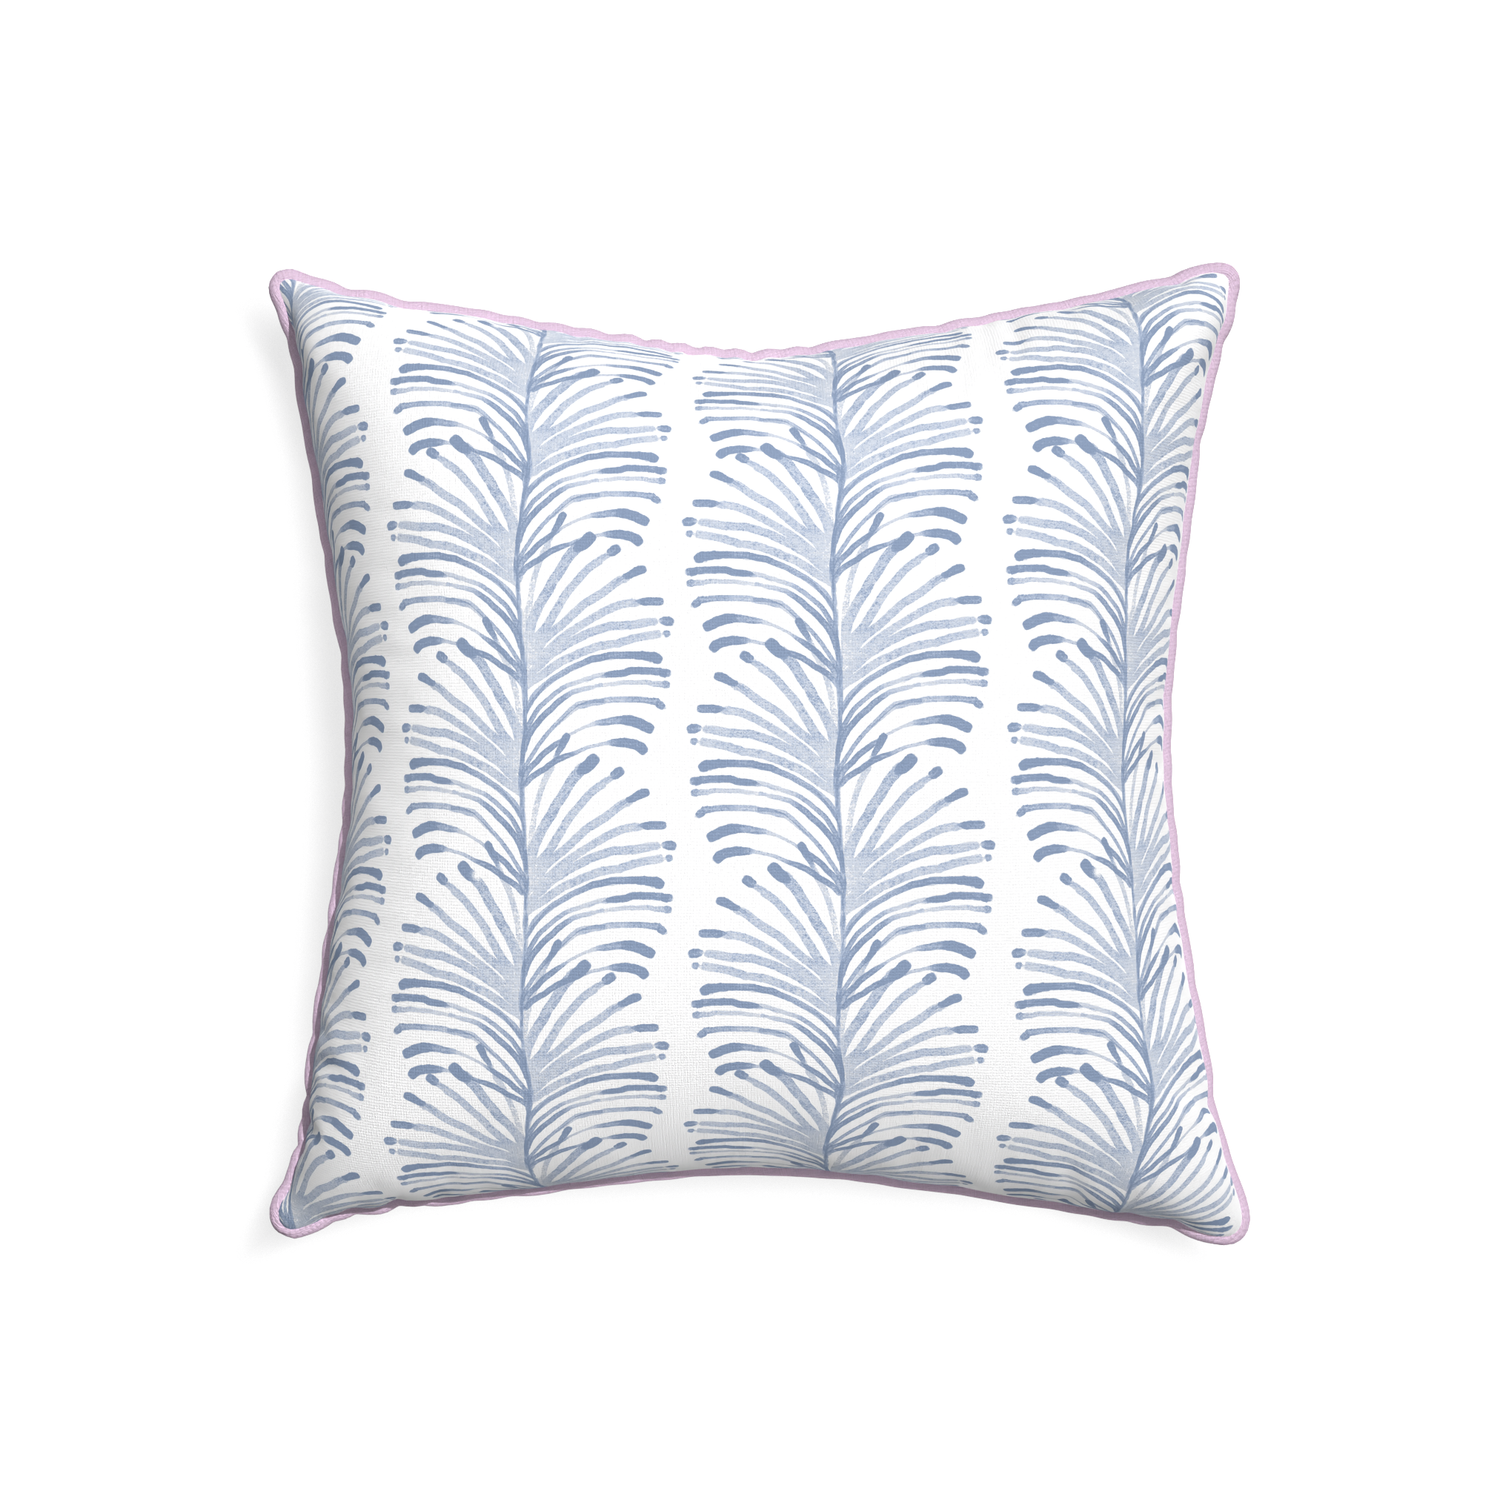 22-square emma sky custom sky blue botanical stripepillow with l piping on white background